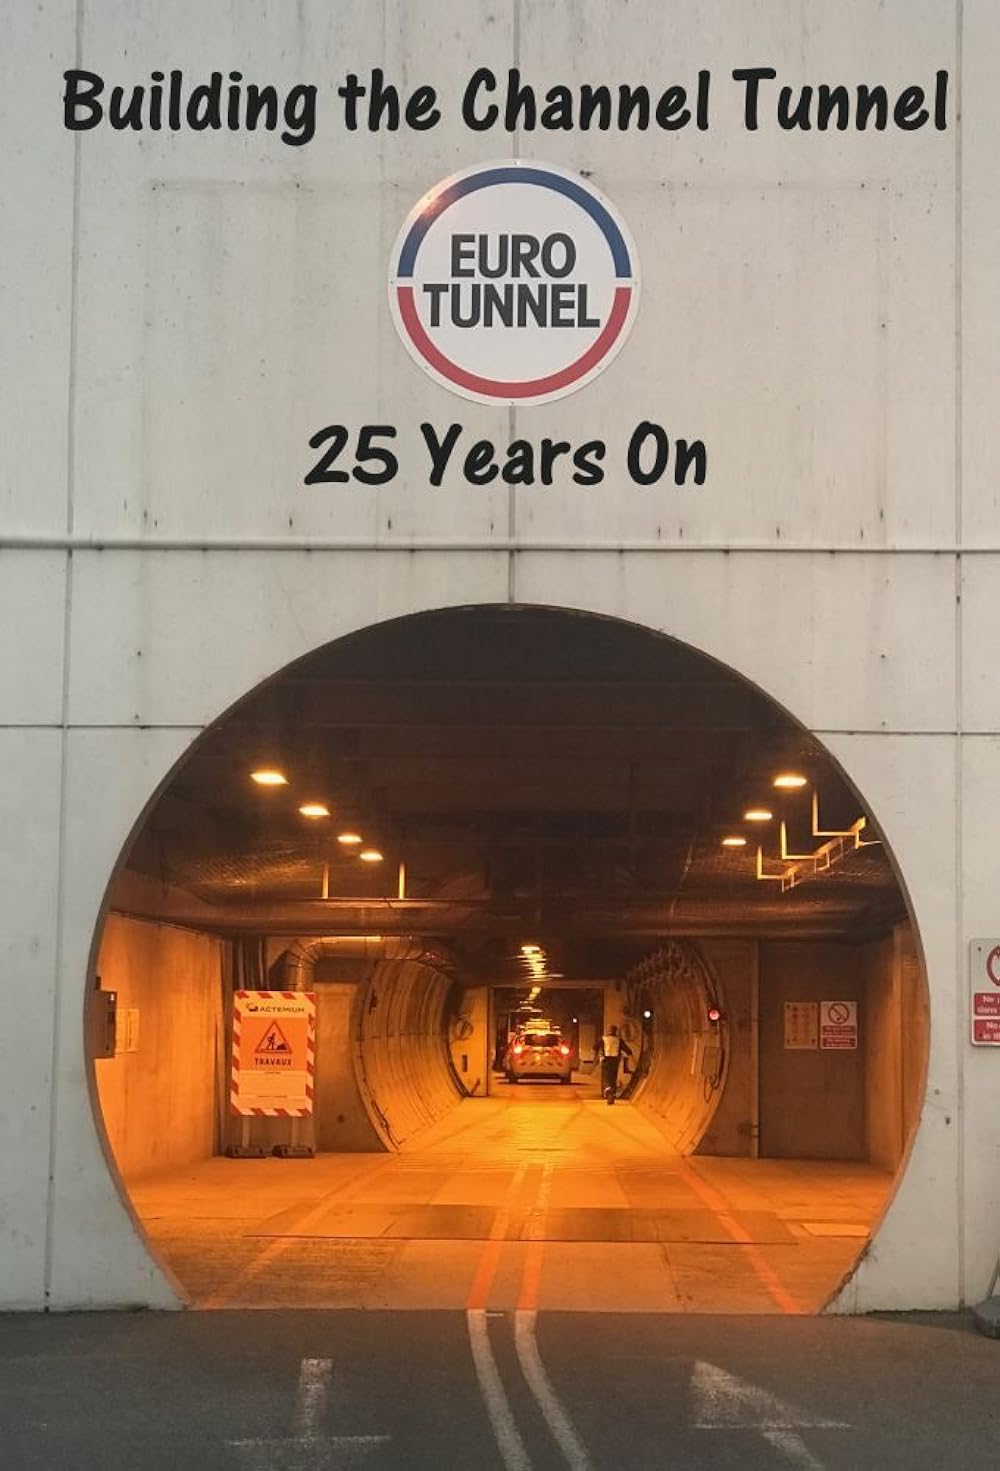 Building the Channel Tunnel: 25 Years On